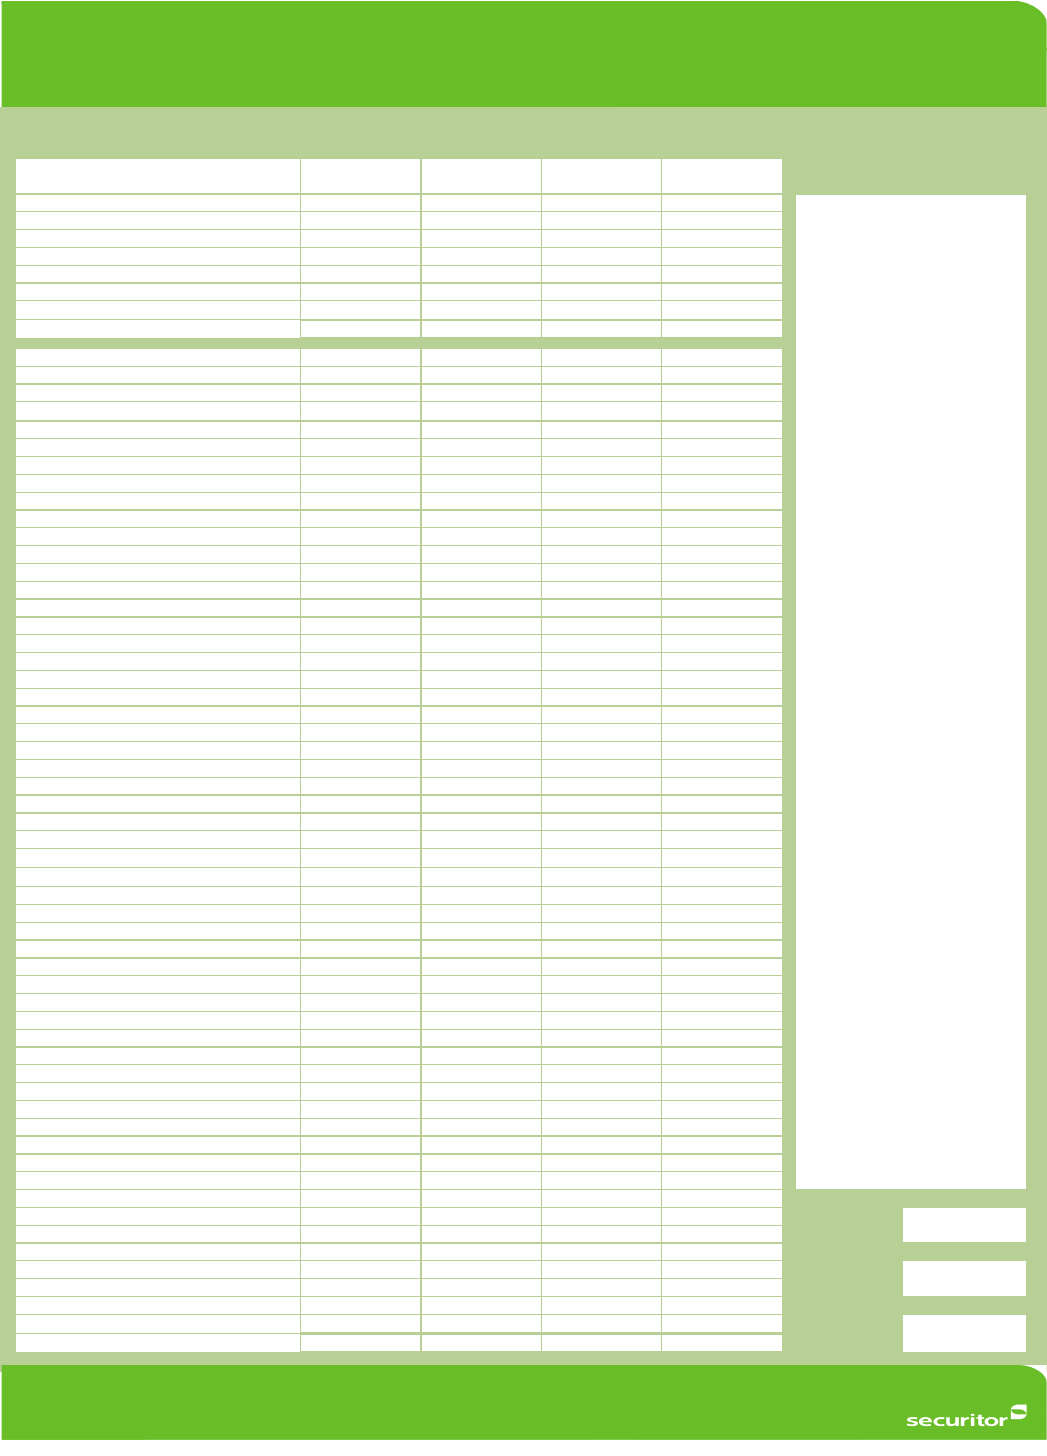 Personal Budget Planner